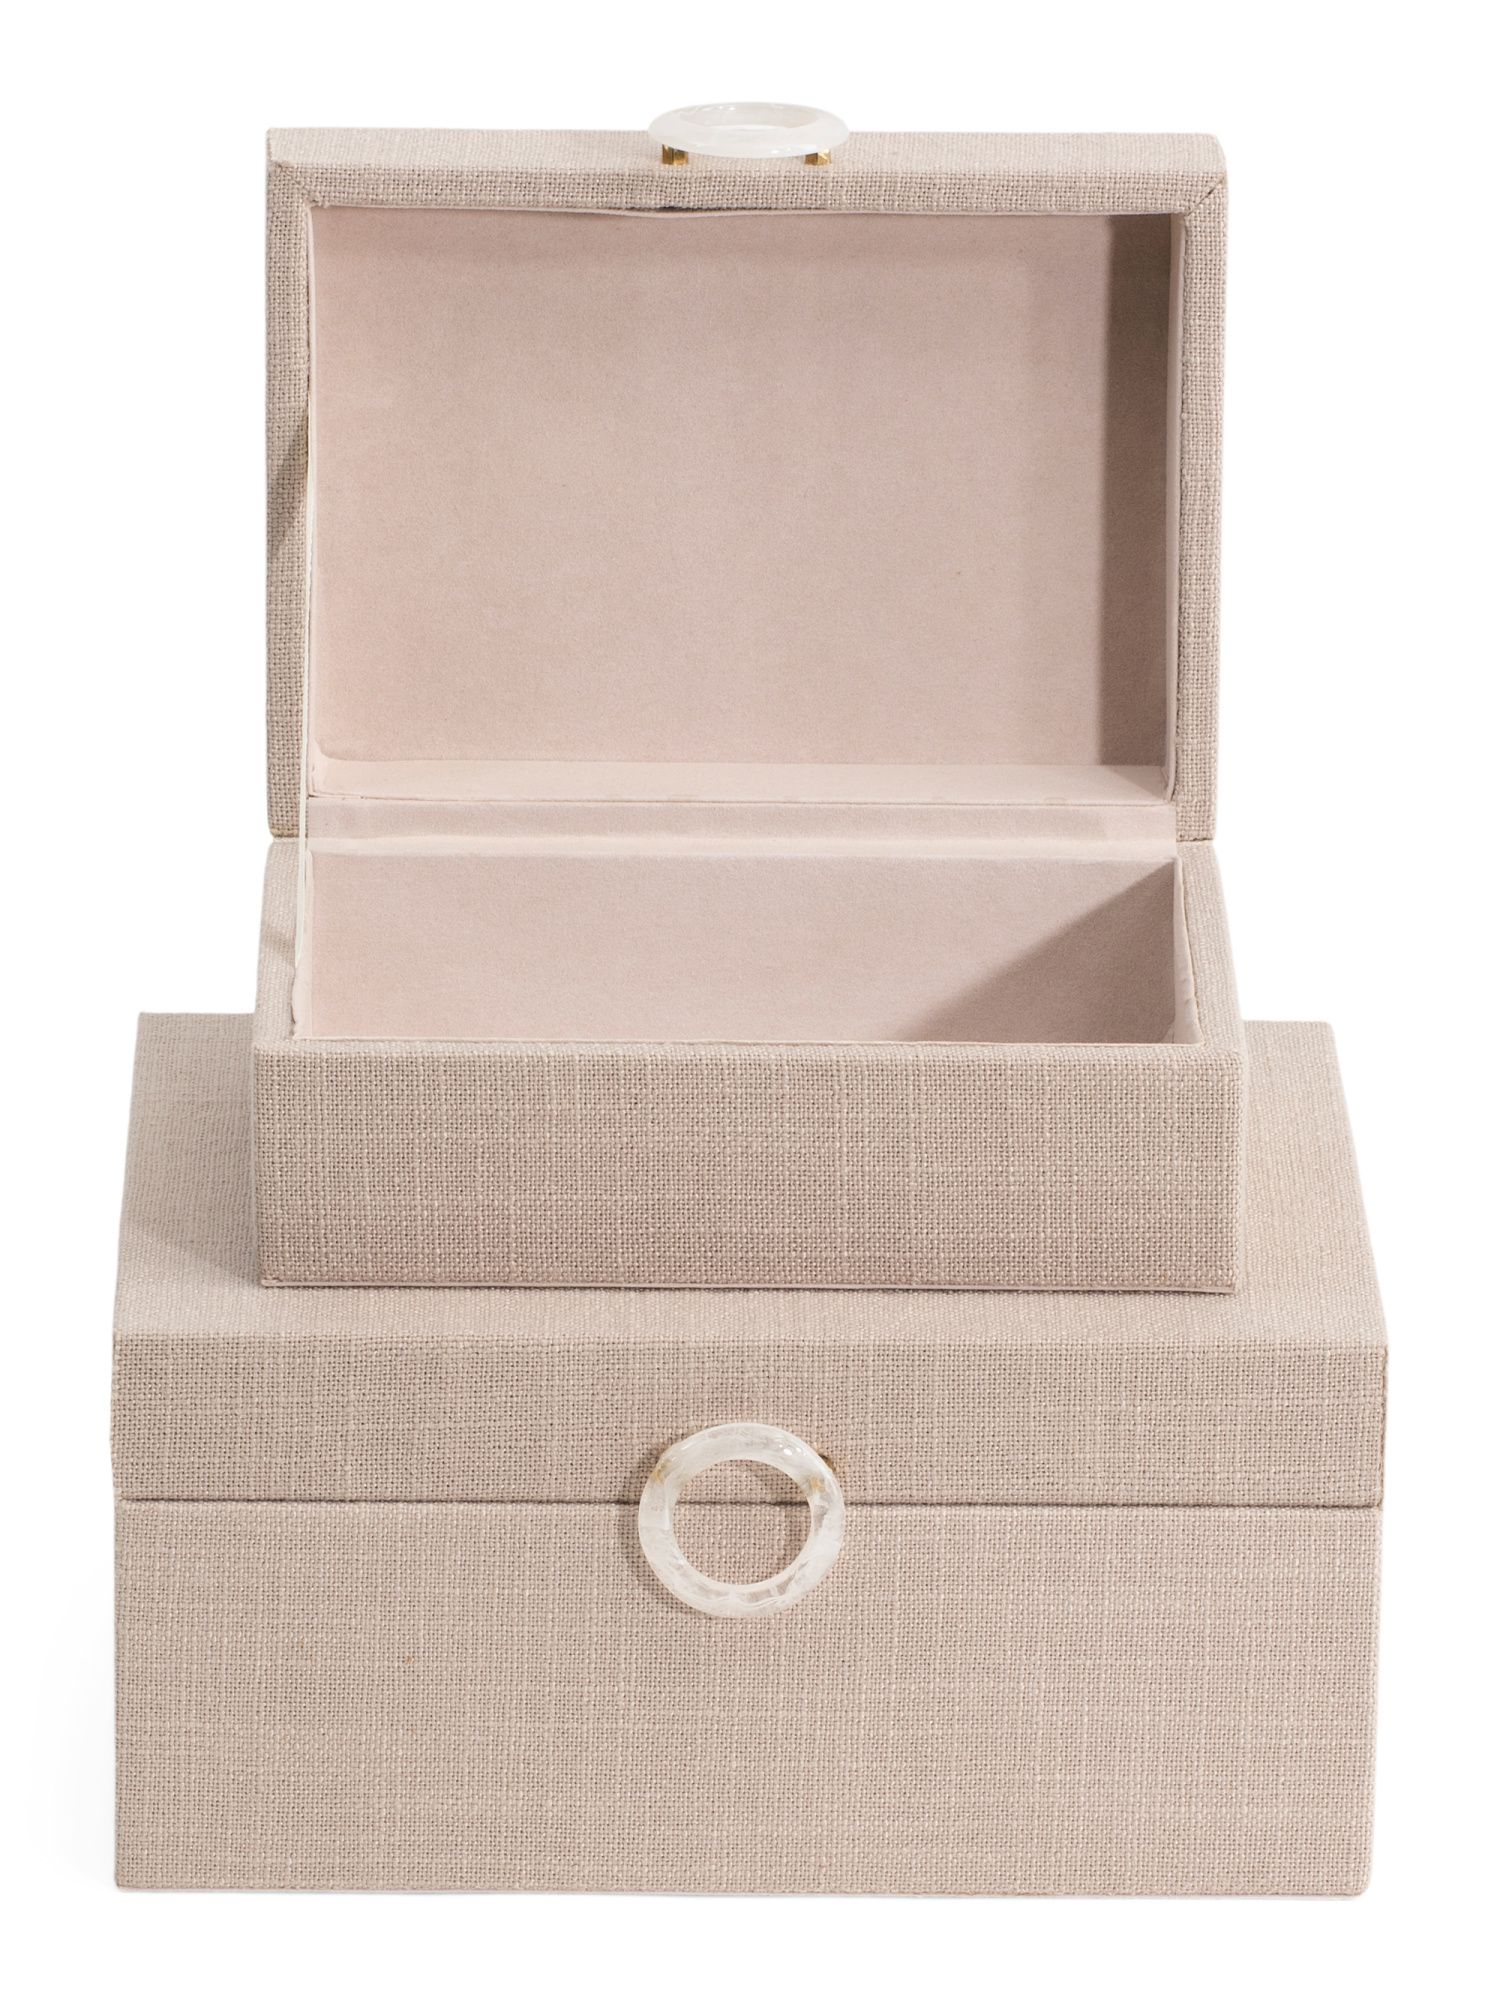 Set Of 2 Boxes With Ring Clasp | TJ Maxx